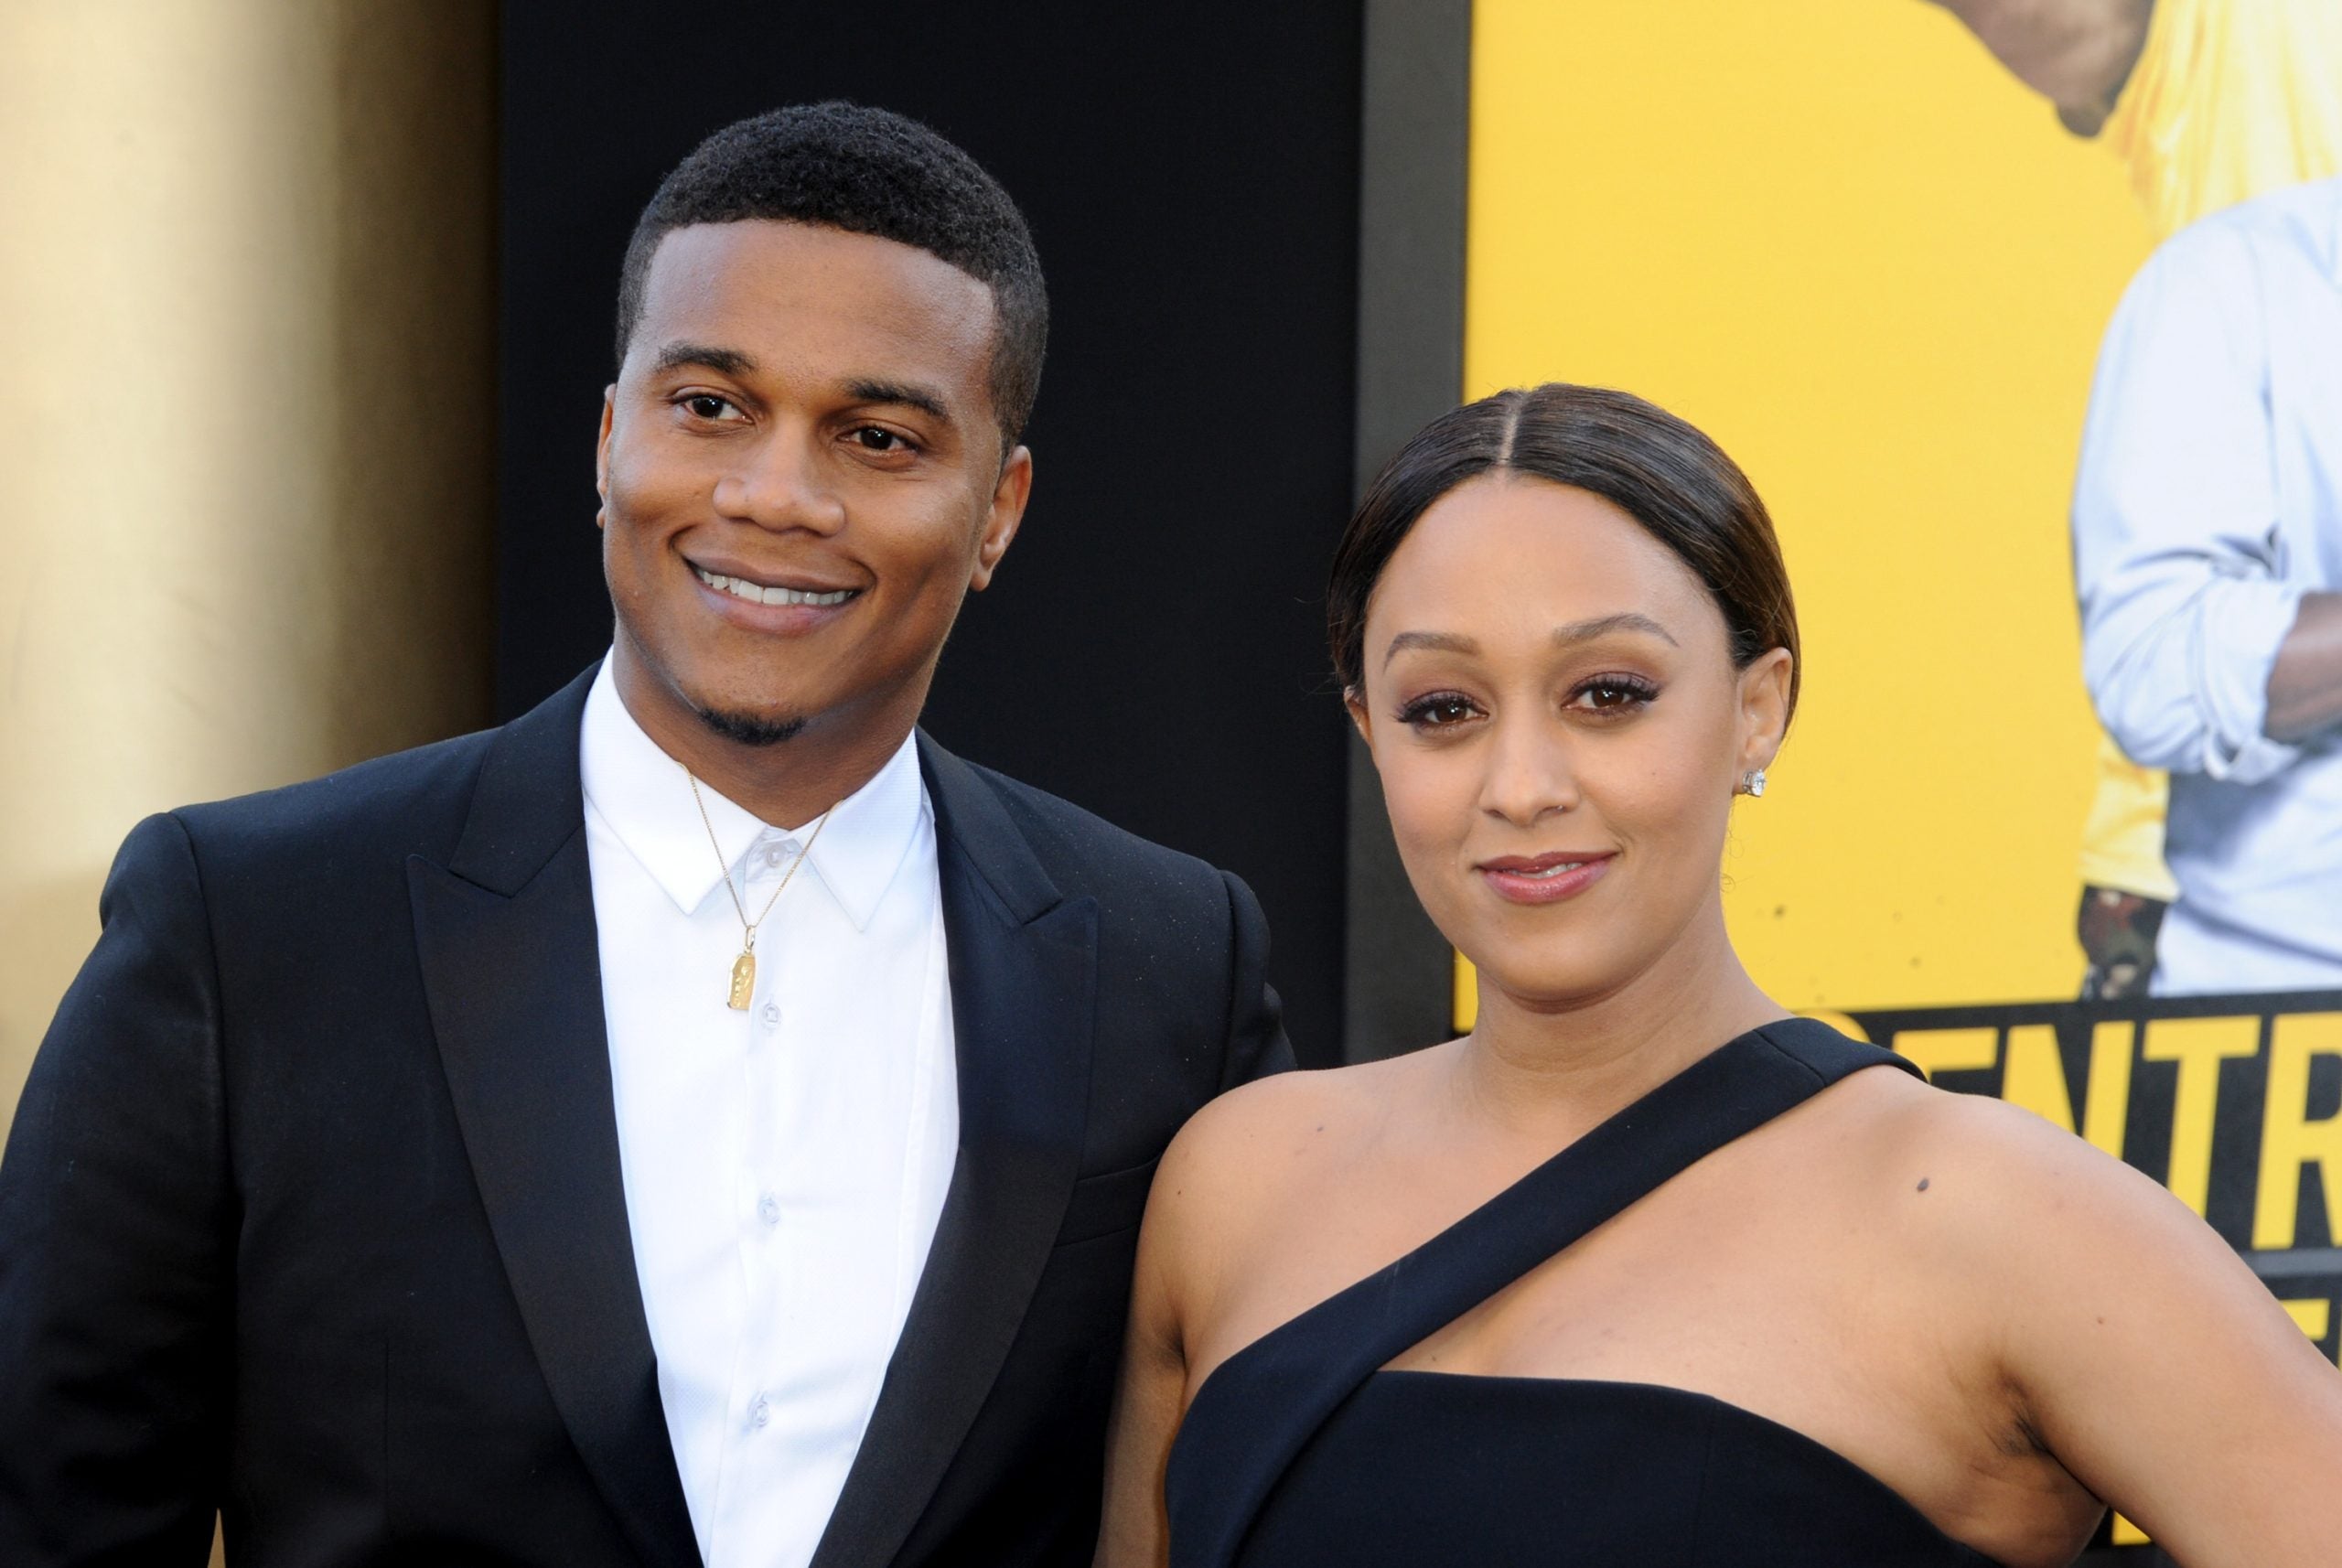 Tia Mowry, Cory Hardrict Set Terms On When Their Kids Can Be Introduced To Future Romantic Partners